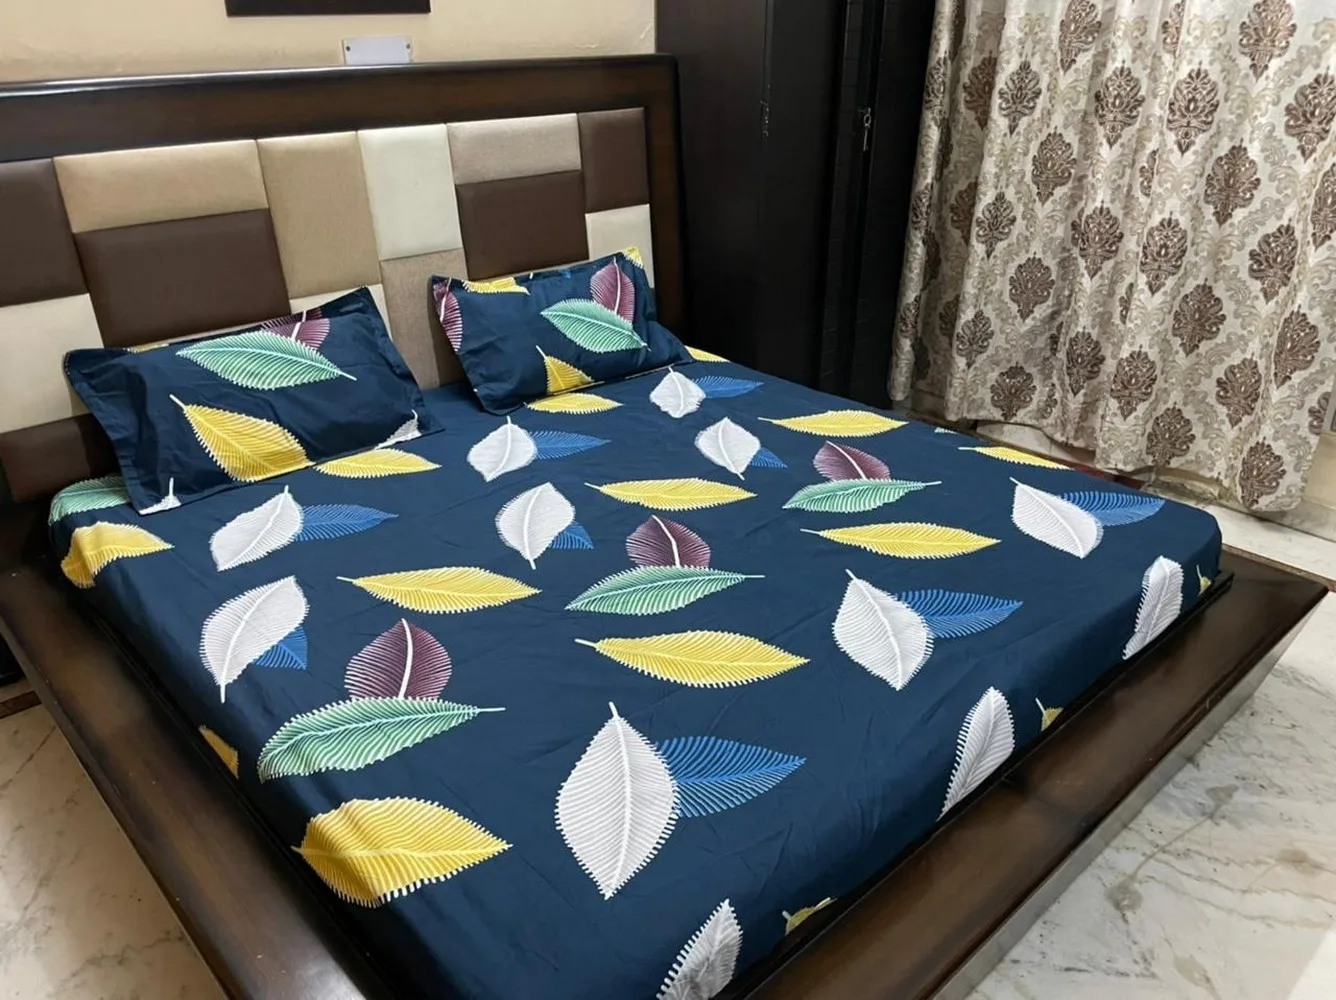 Bedsheet printed, Fitted, Elastic Corner, 90x100, Glace Cotton, 2 Pillow Covers, blue, leaf design